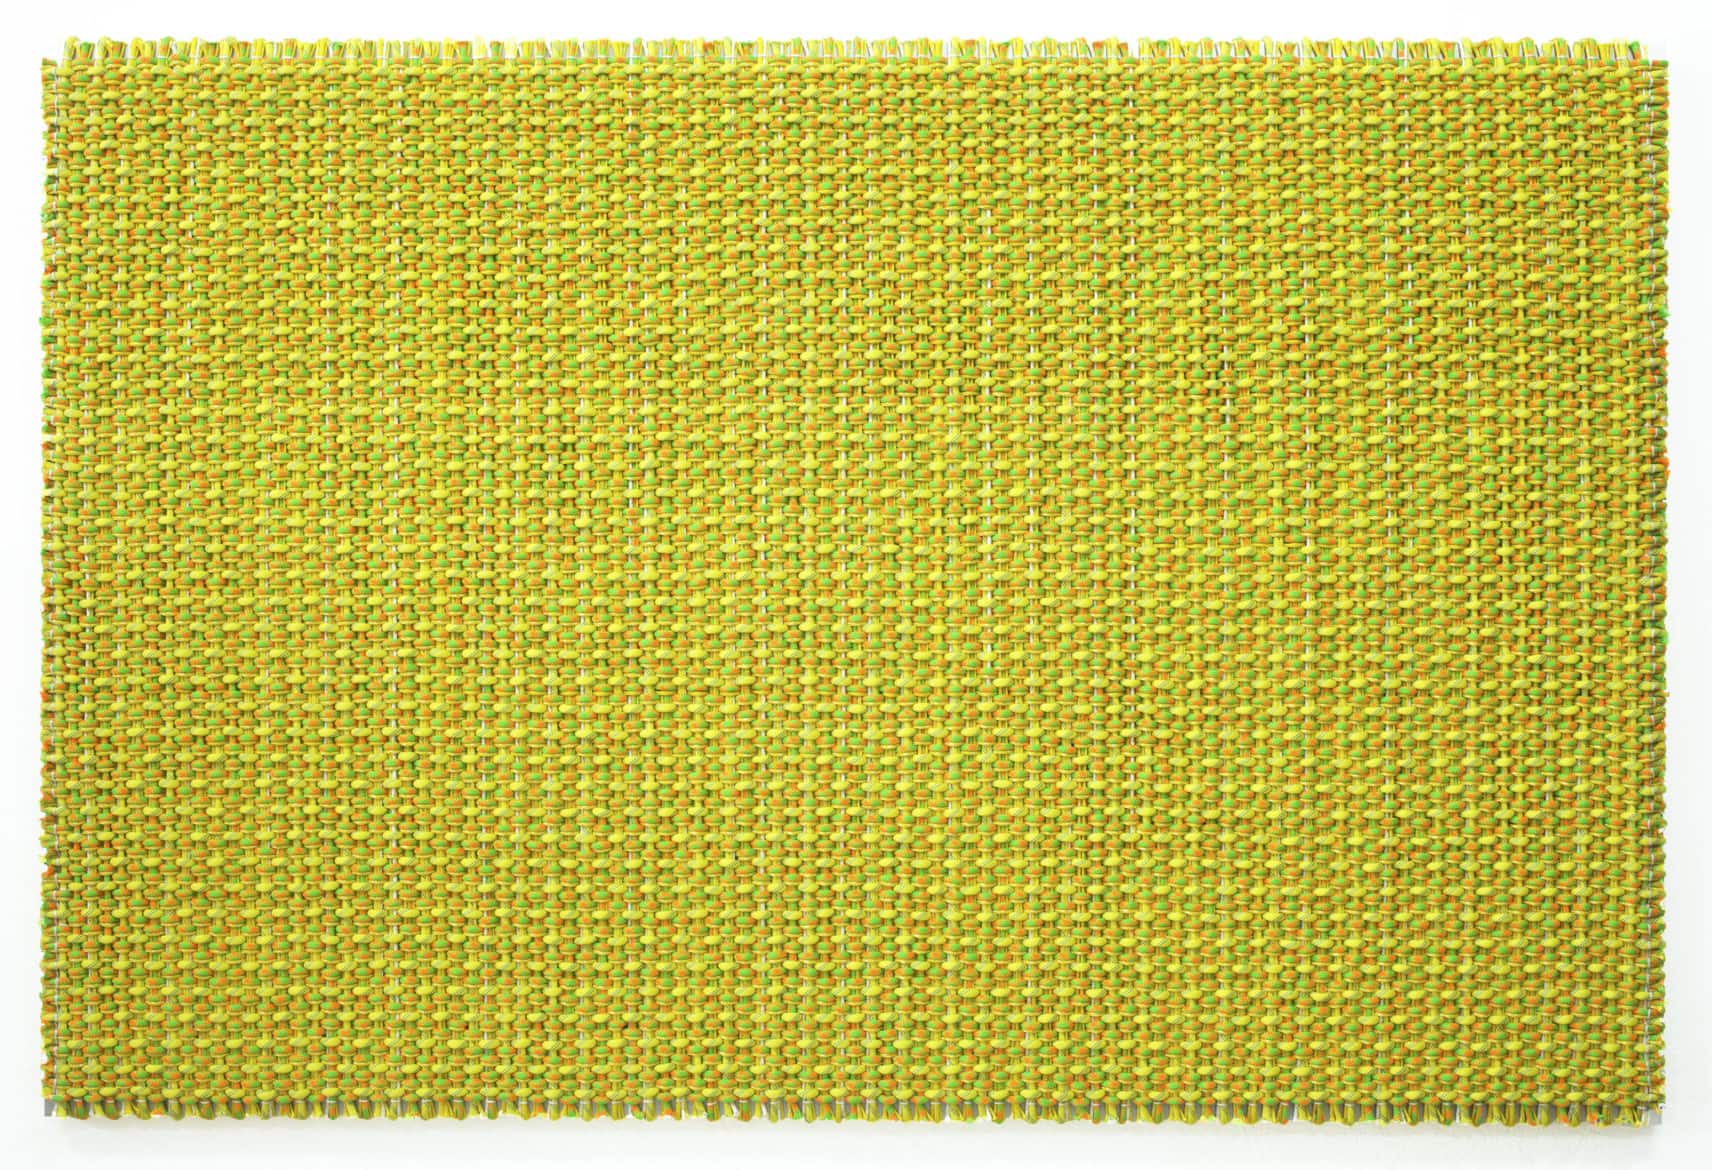 'Composition in Blue and Yellow (Ode to Catalonia)', 2018, polyester and aluminium, 172 x 257 x 8cm